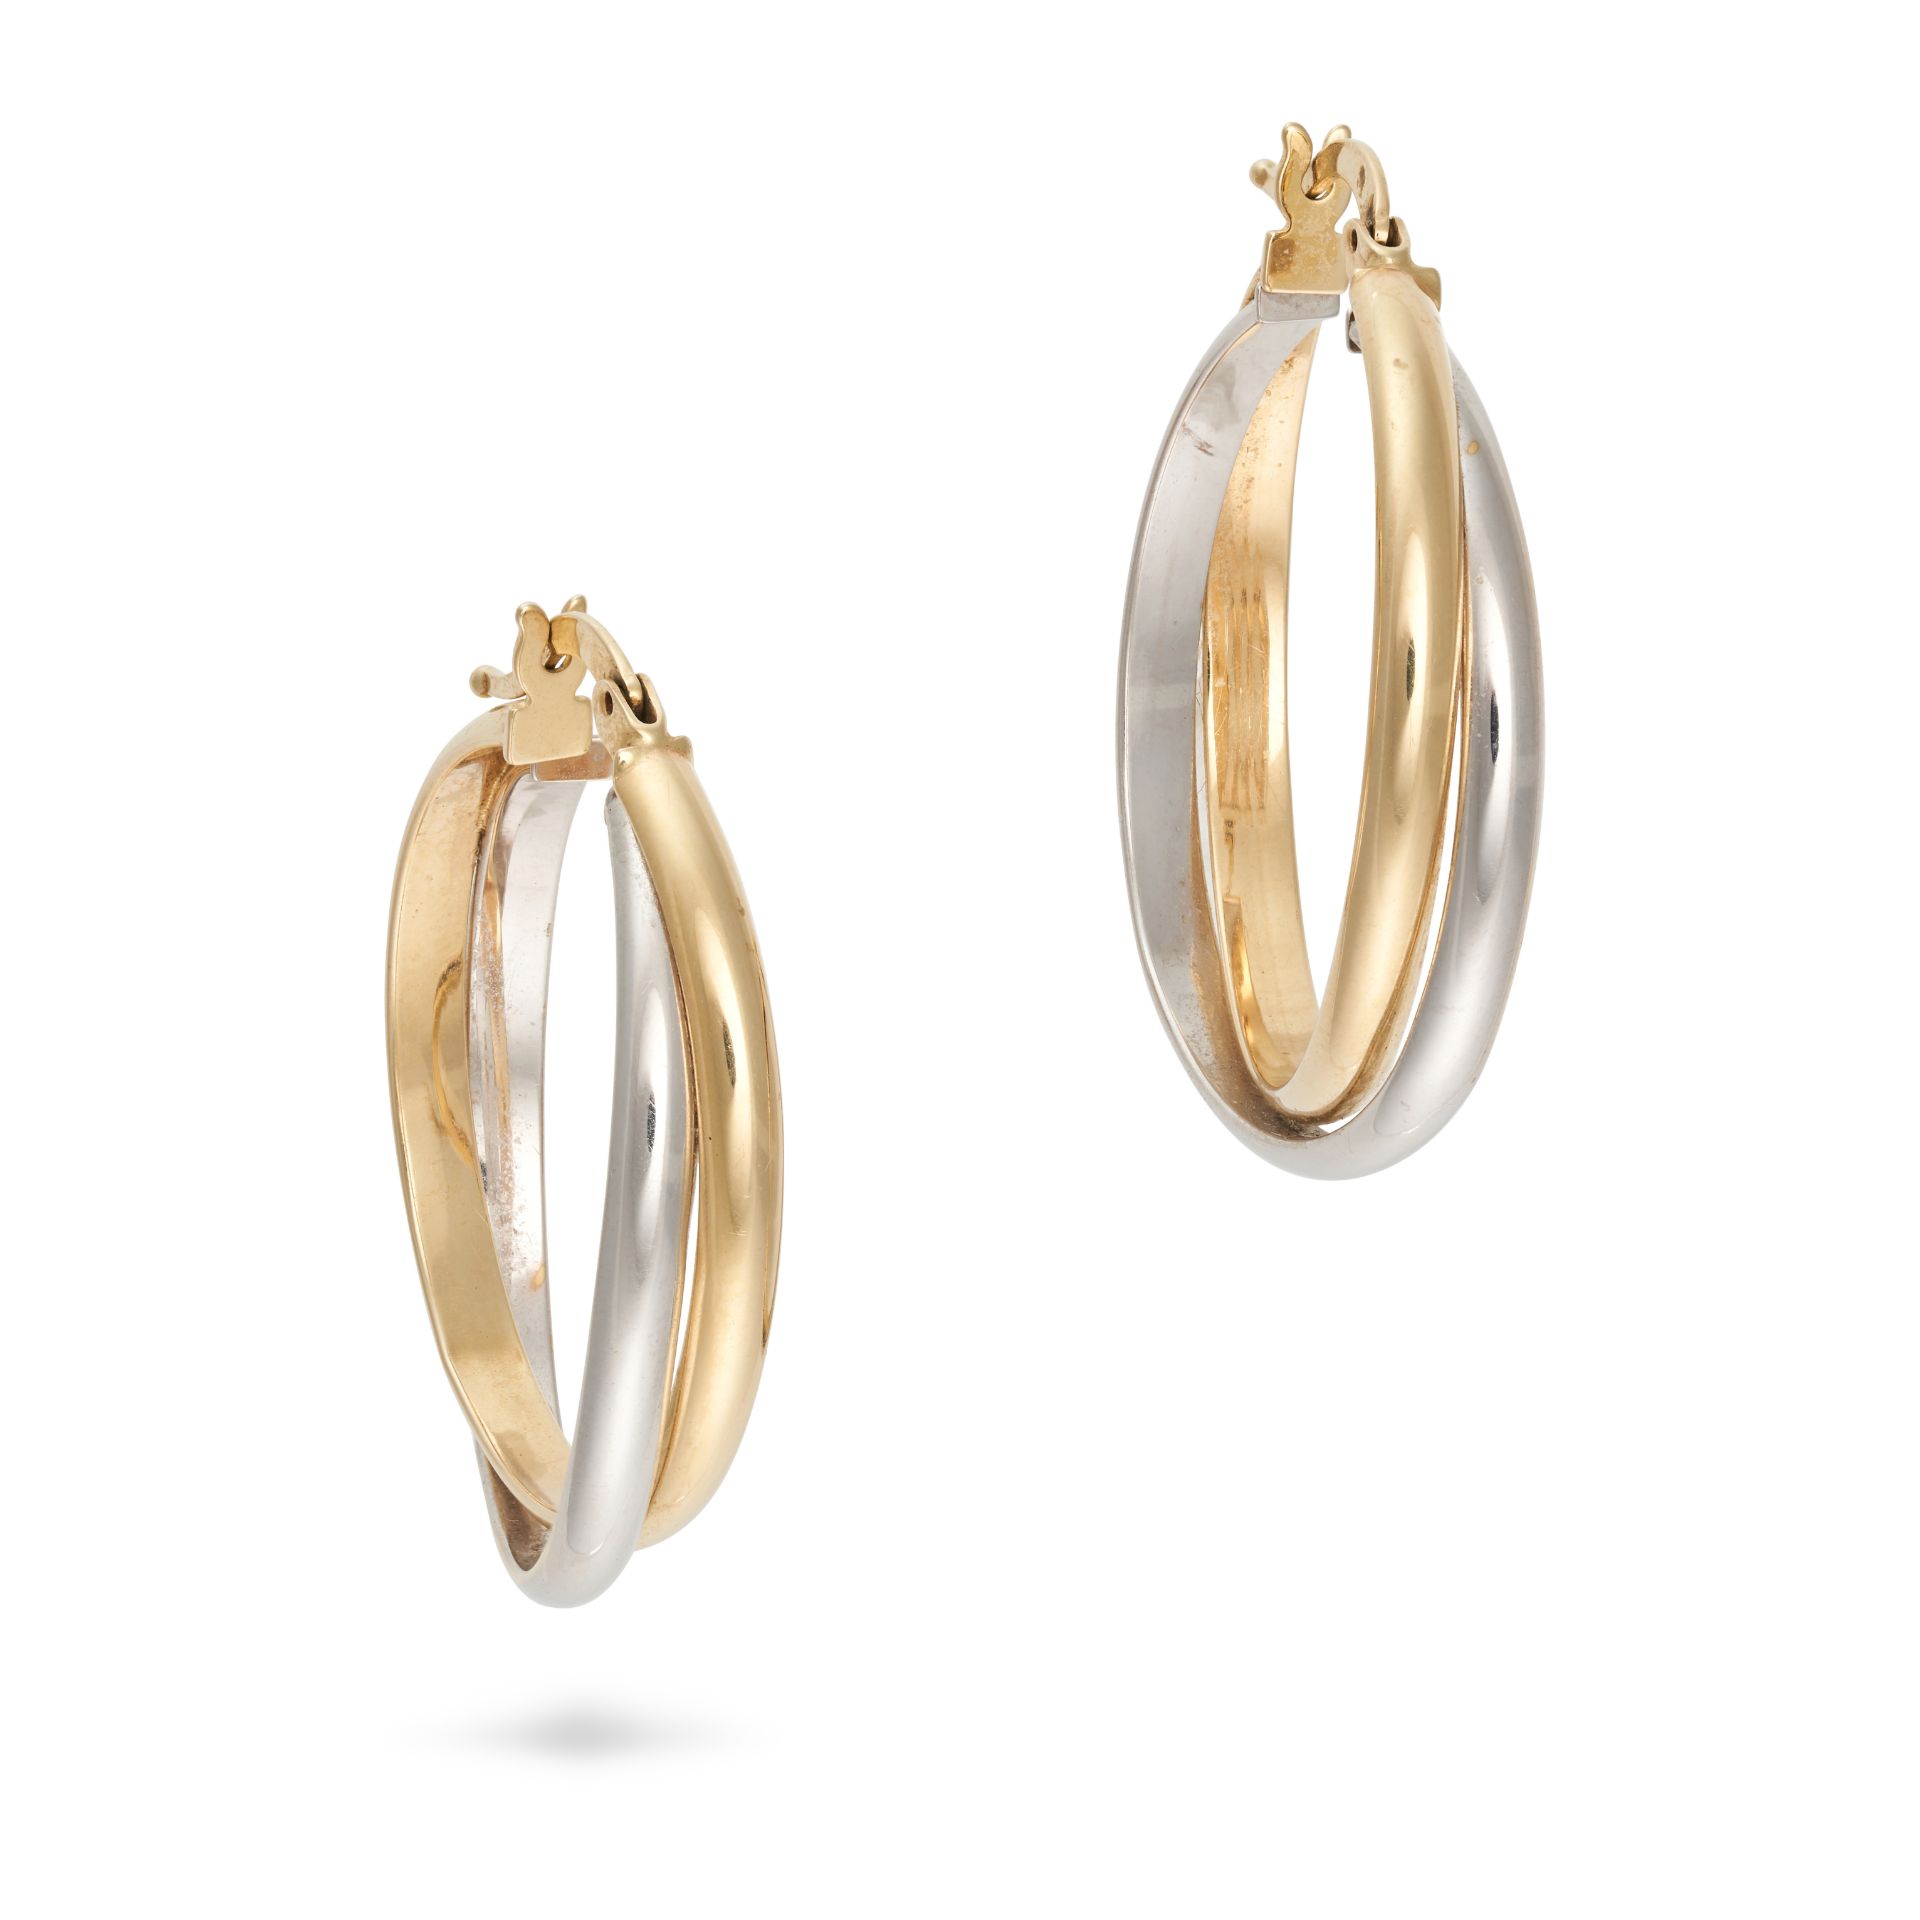 A PAIR OF HOOP EARRINGS in 14ct gold, interlocking white and yellow gold hoops, stamped 585, 3.7g.